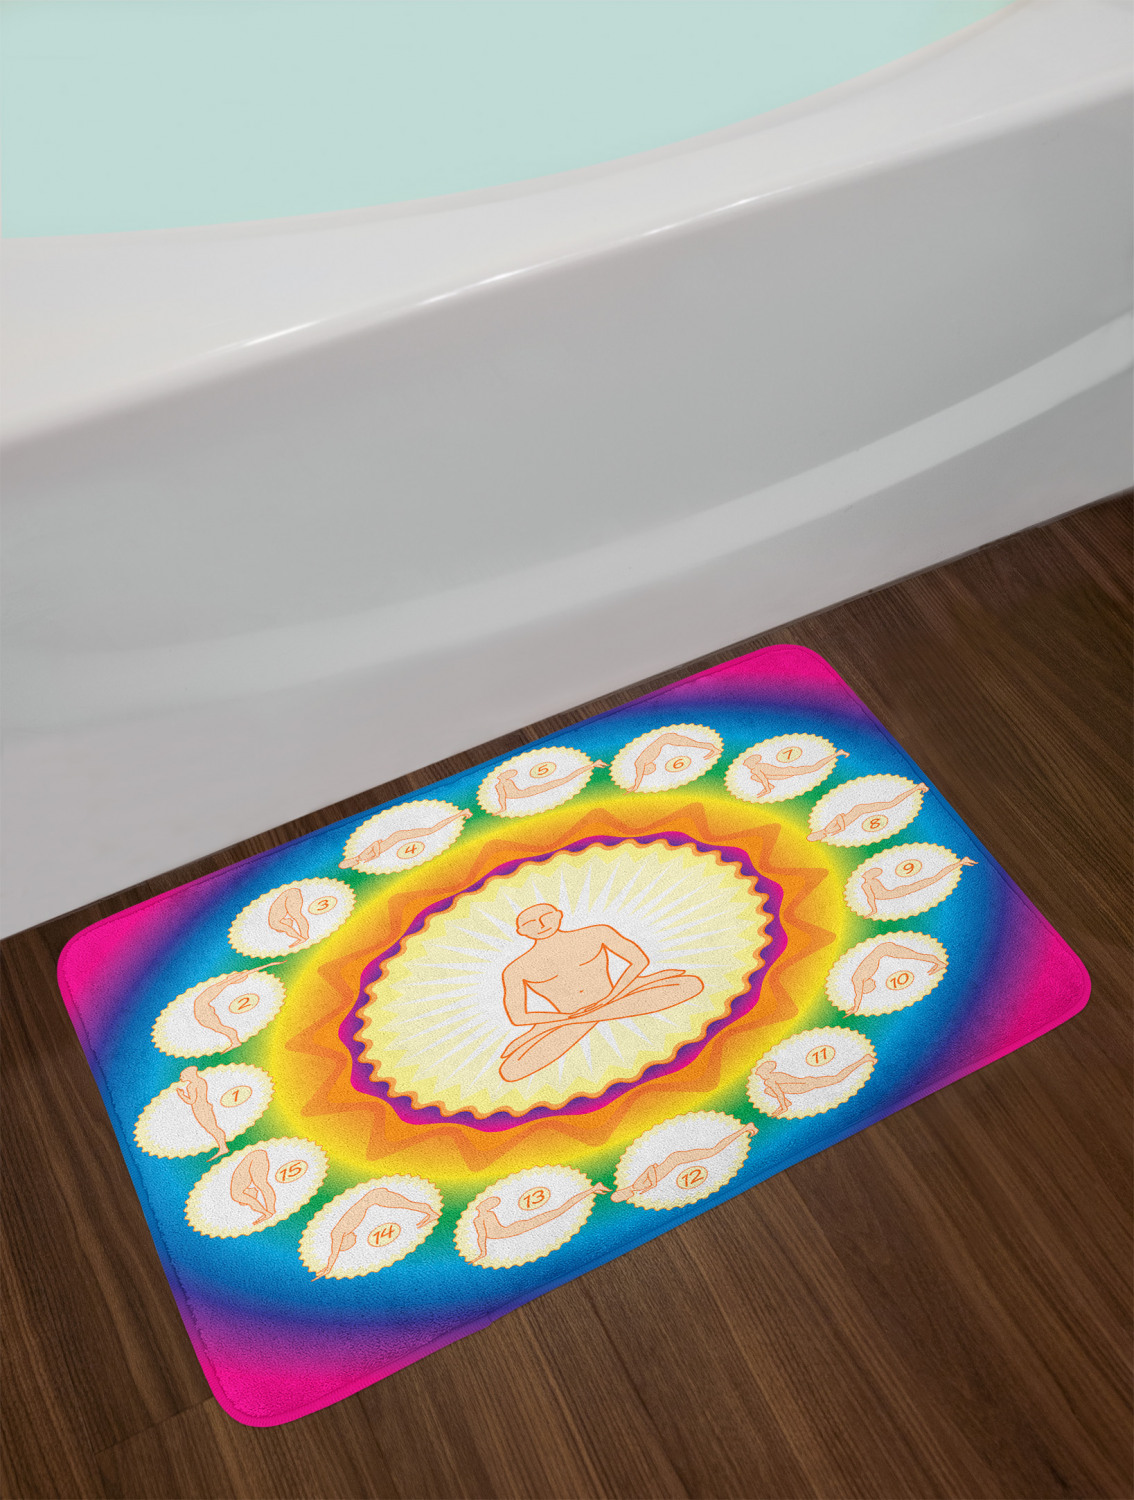 Yoga Bath Mat, Yogi in The Lotus Posture and Exercises in Several Positions Surya Namaskar Vitality, Non-Slip Plush Mat Bathroom Kitchen Laundry Room Decor, 29.5 X 17.5 Inches, Multicolor, Ambesonne - image 2 of 2